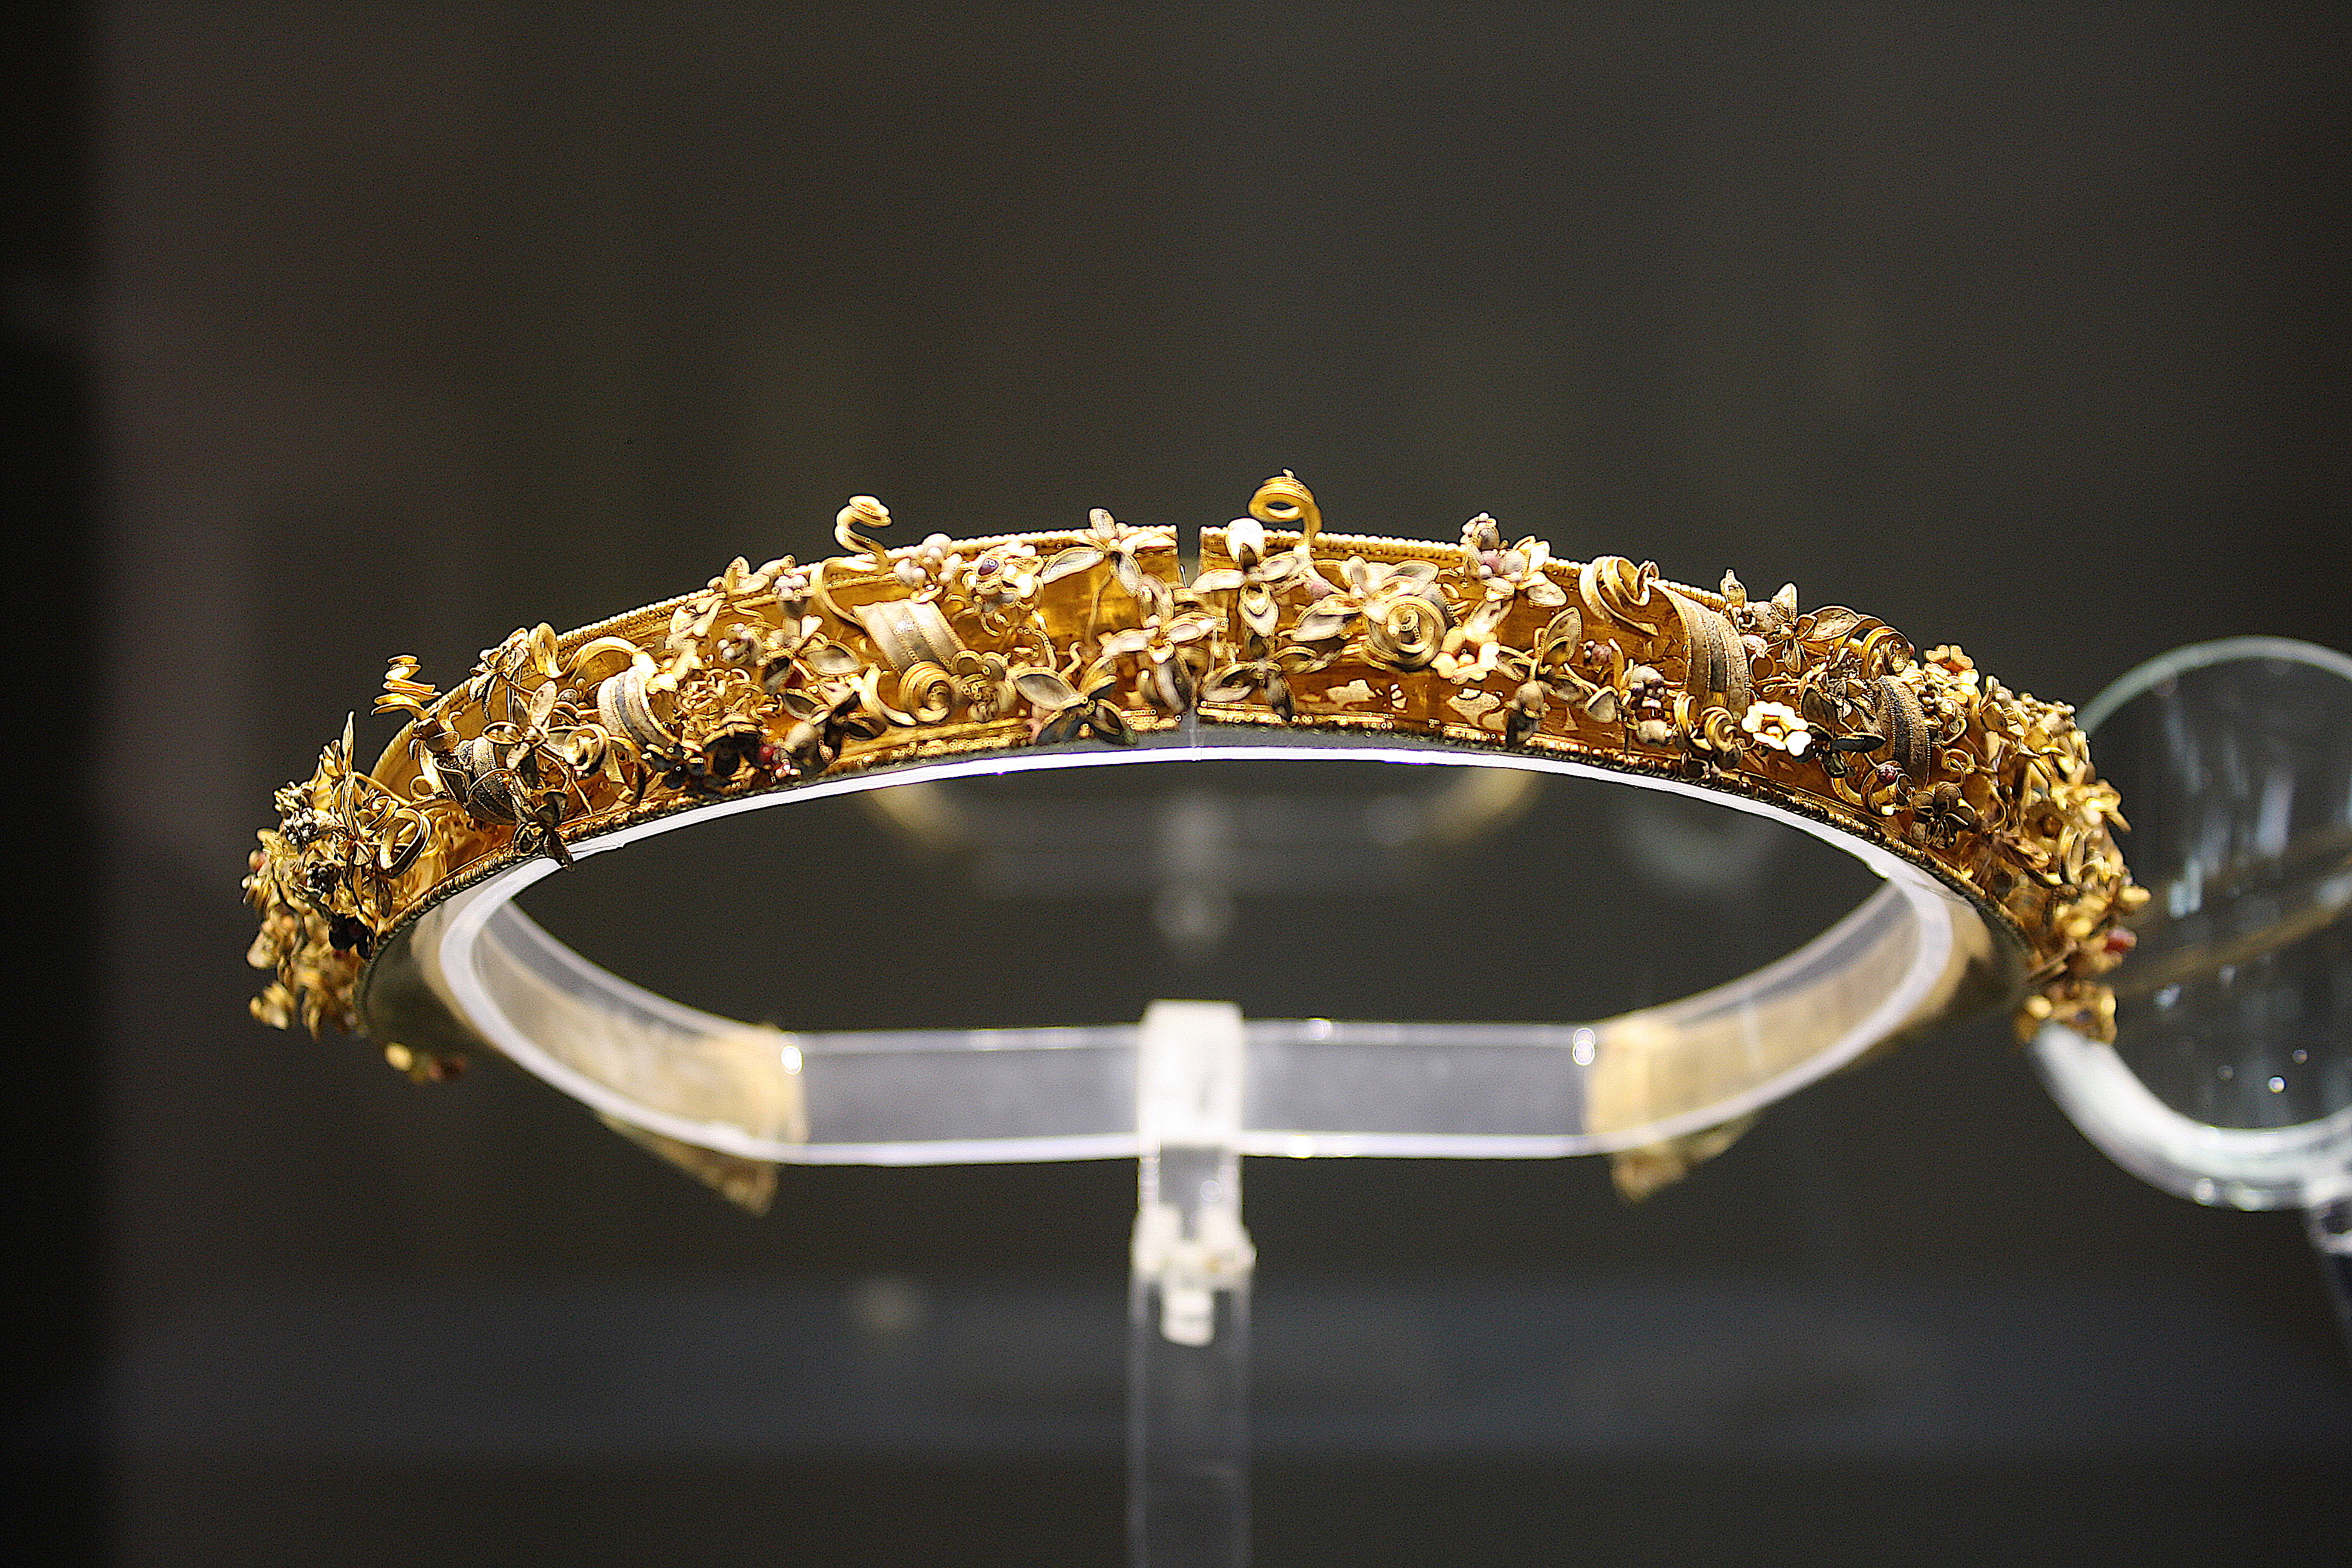 https://www.worldhistory.org/image/7048/gold-diadem-canosa/download/